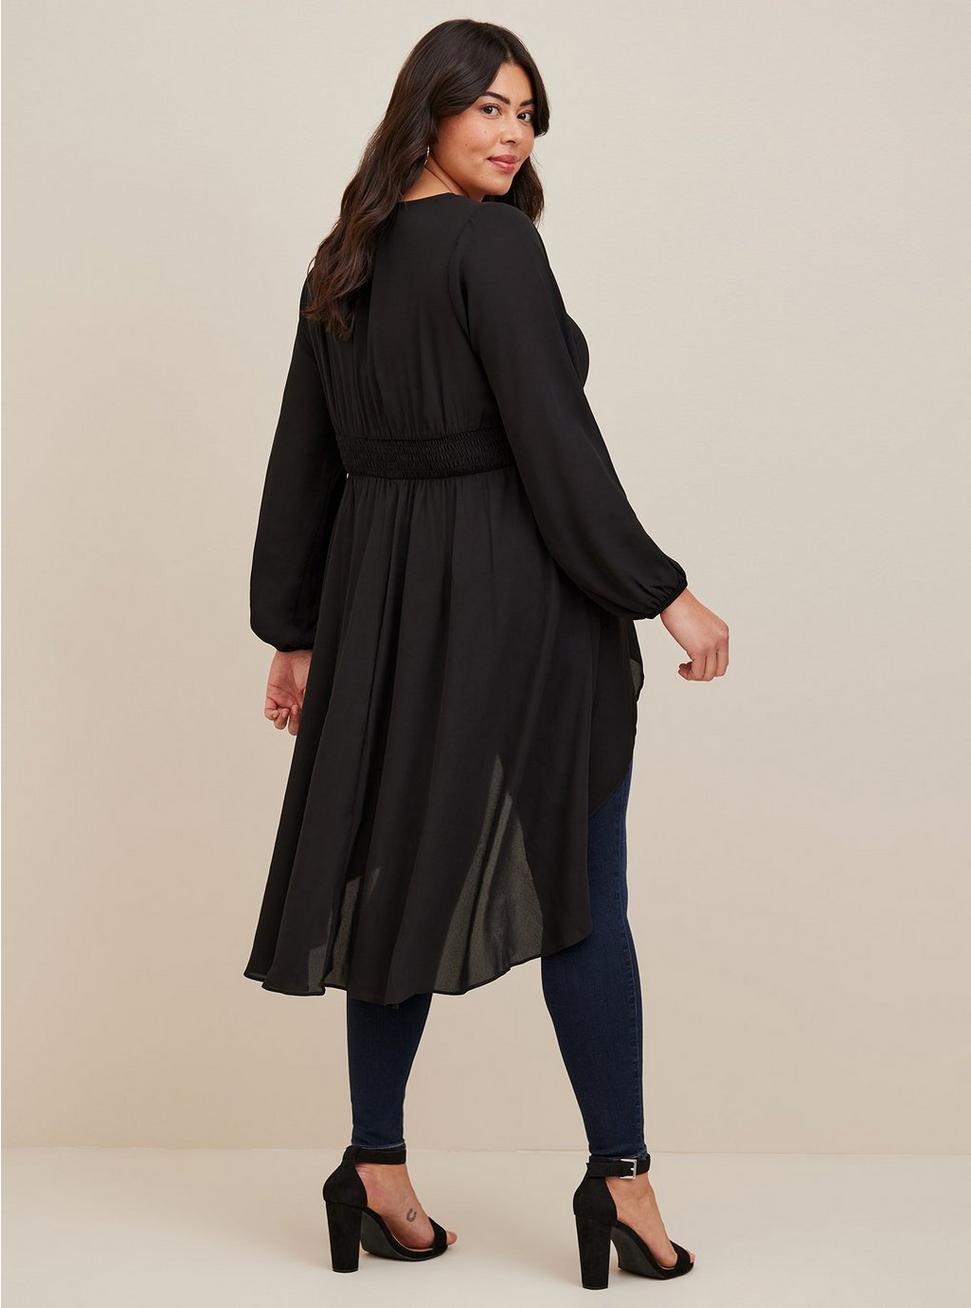 Plus Size - Georgette Smocked High-Low Tunic - Torrid